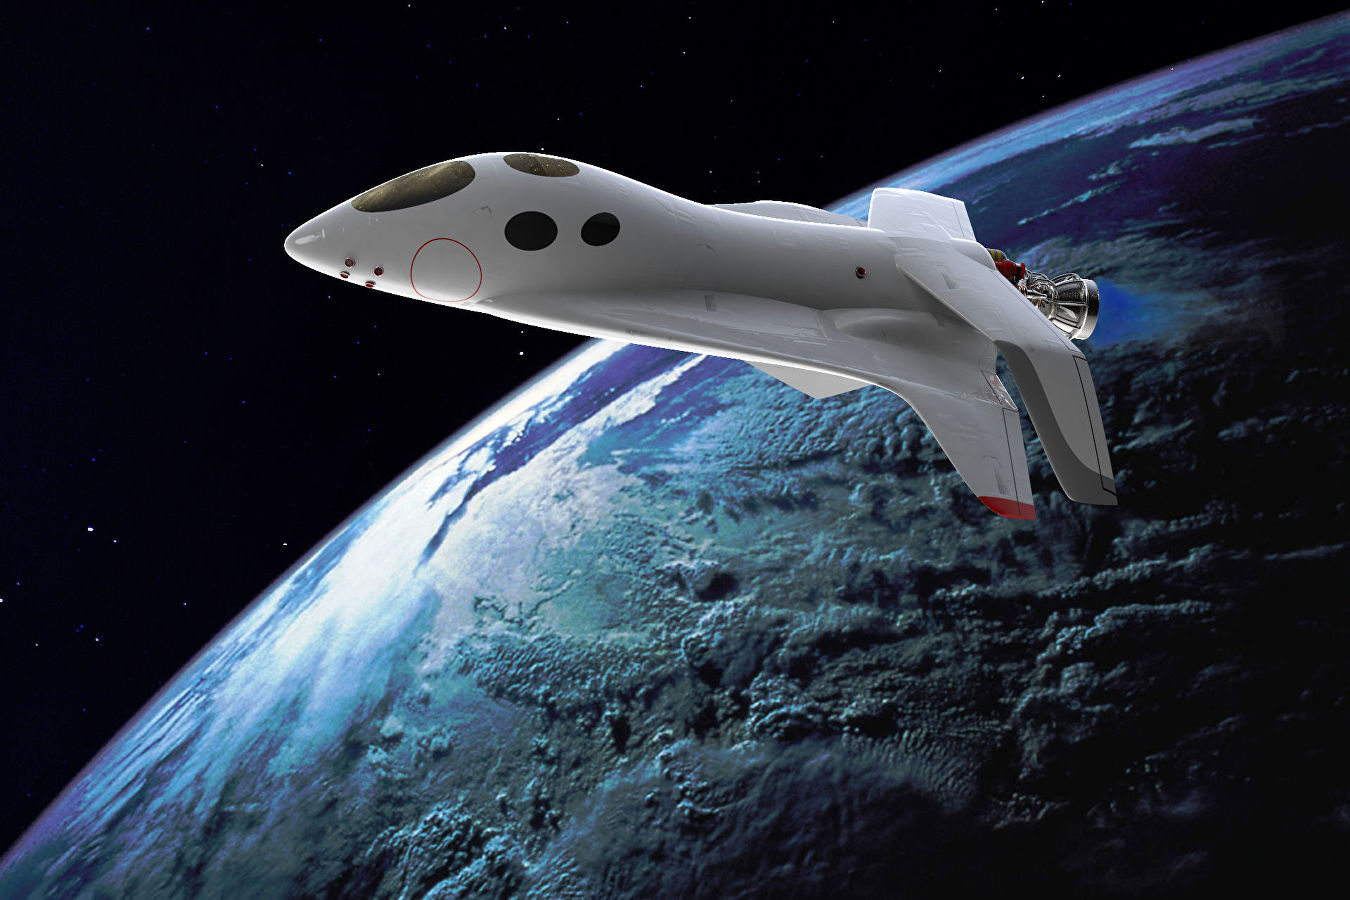 Russia is developing a tourist spaceplane